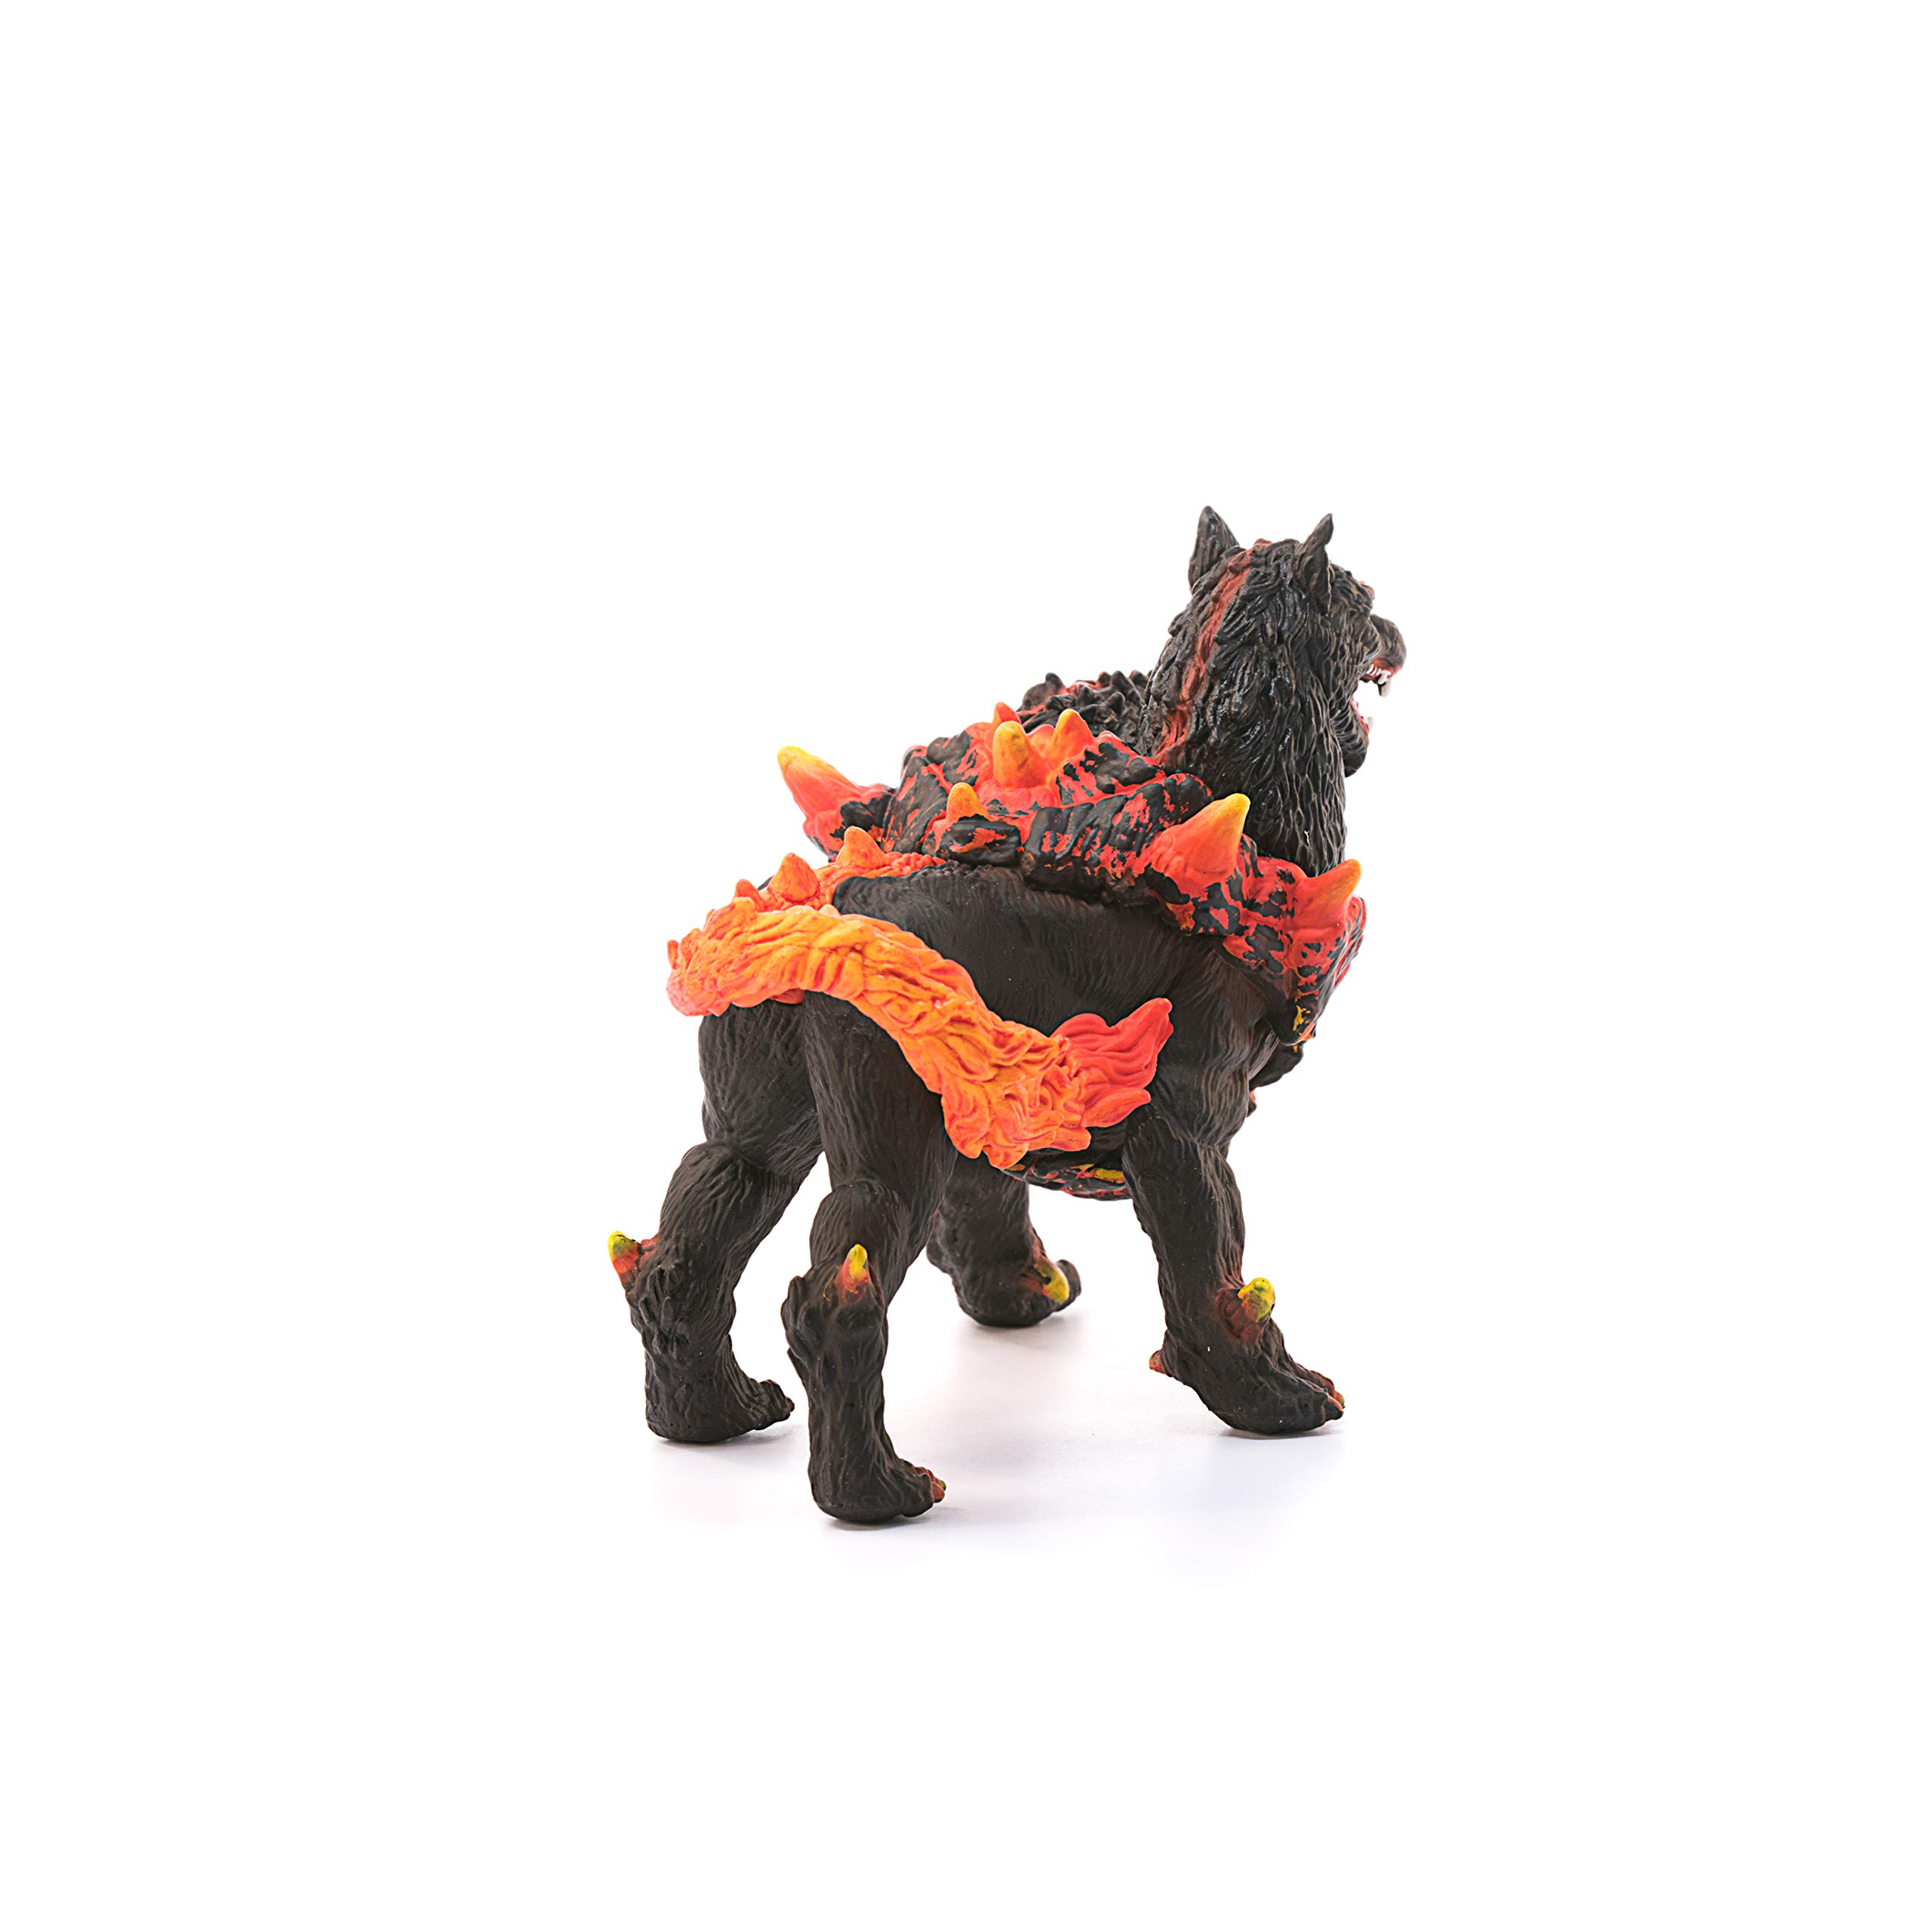 Schleich Eldrador Creatures, Lava Monster Mythical Creatures Toys for Kids, Hellhound Action Figure, Ages 7+